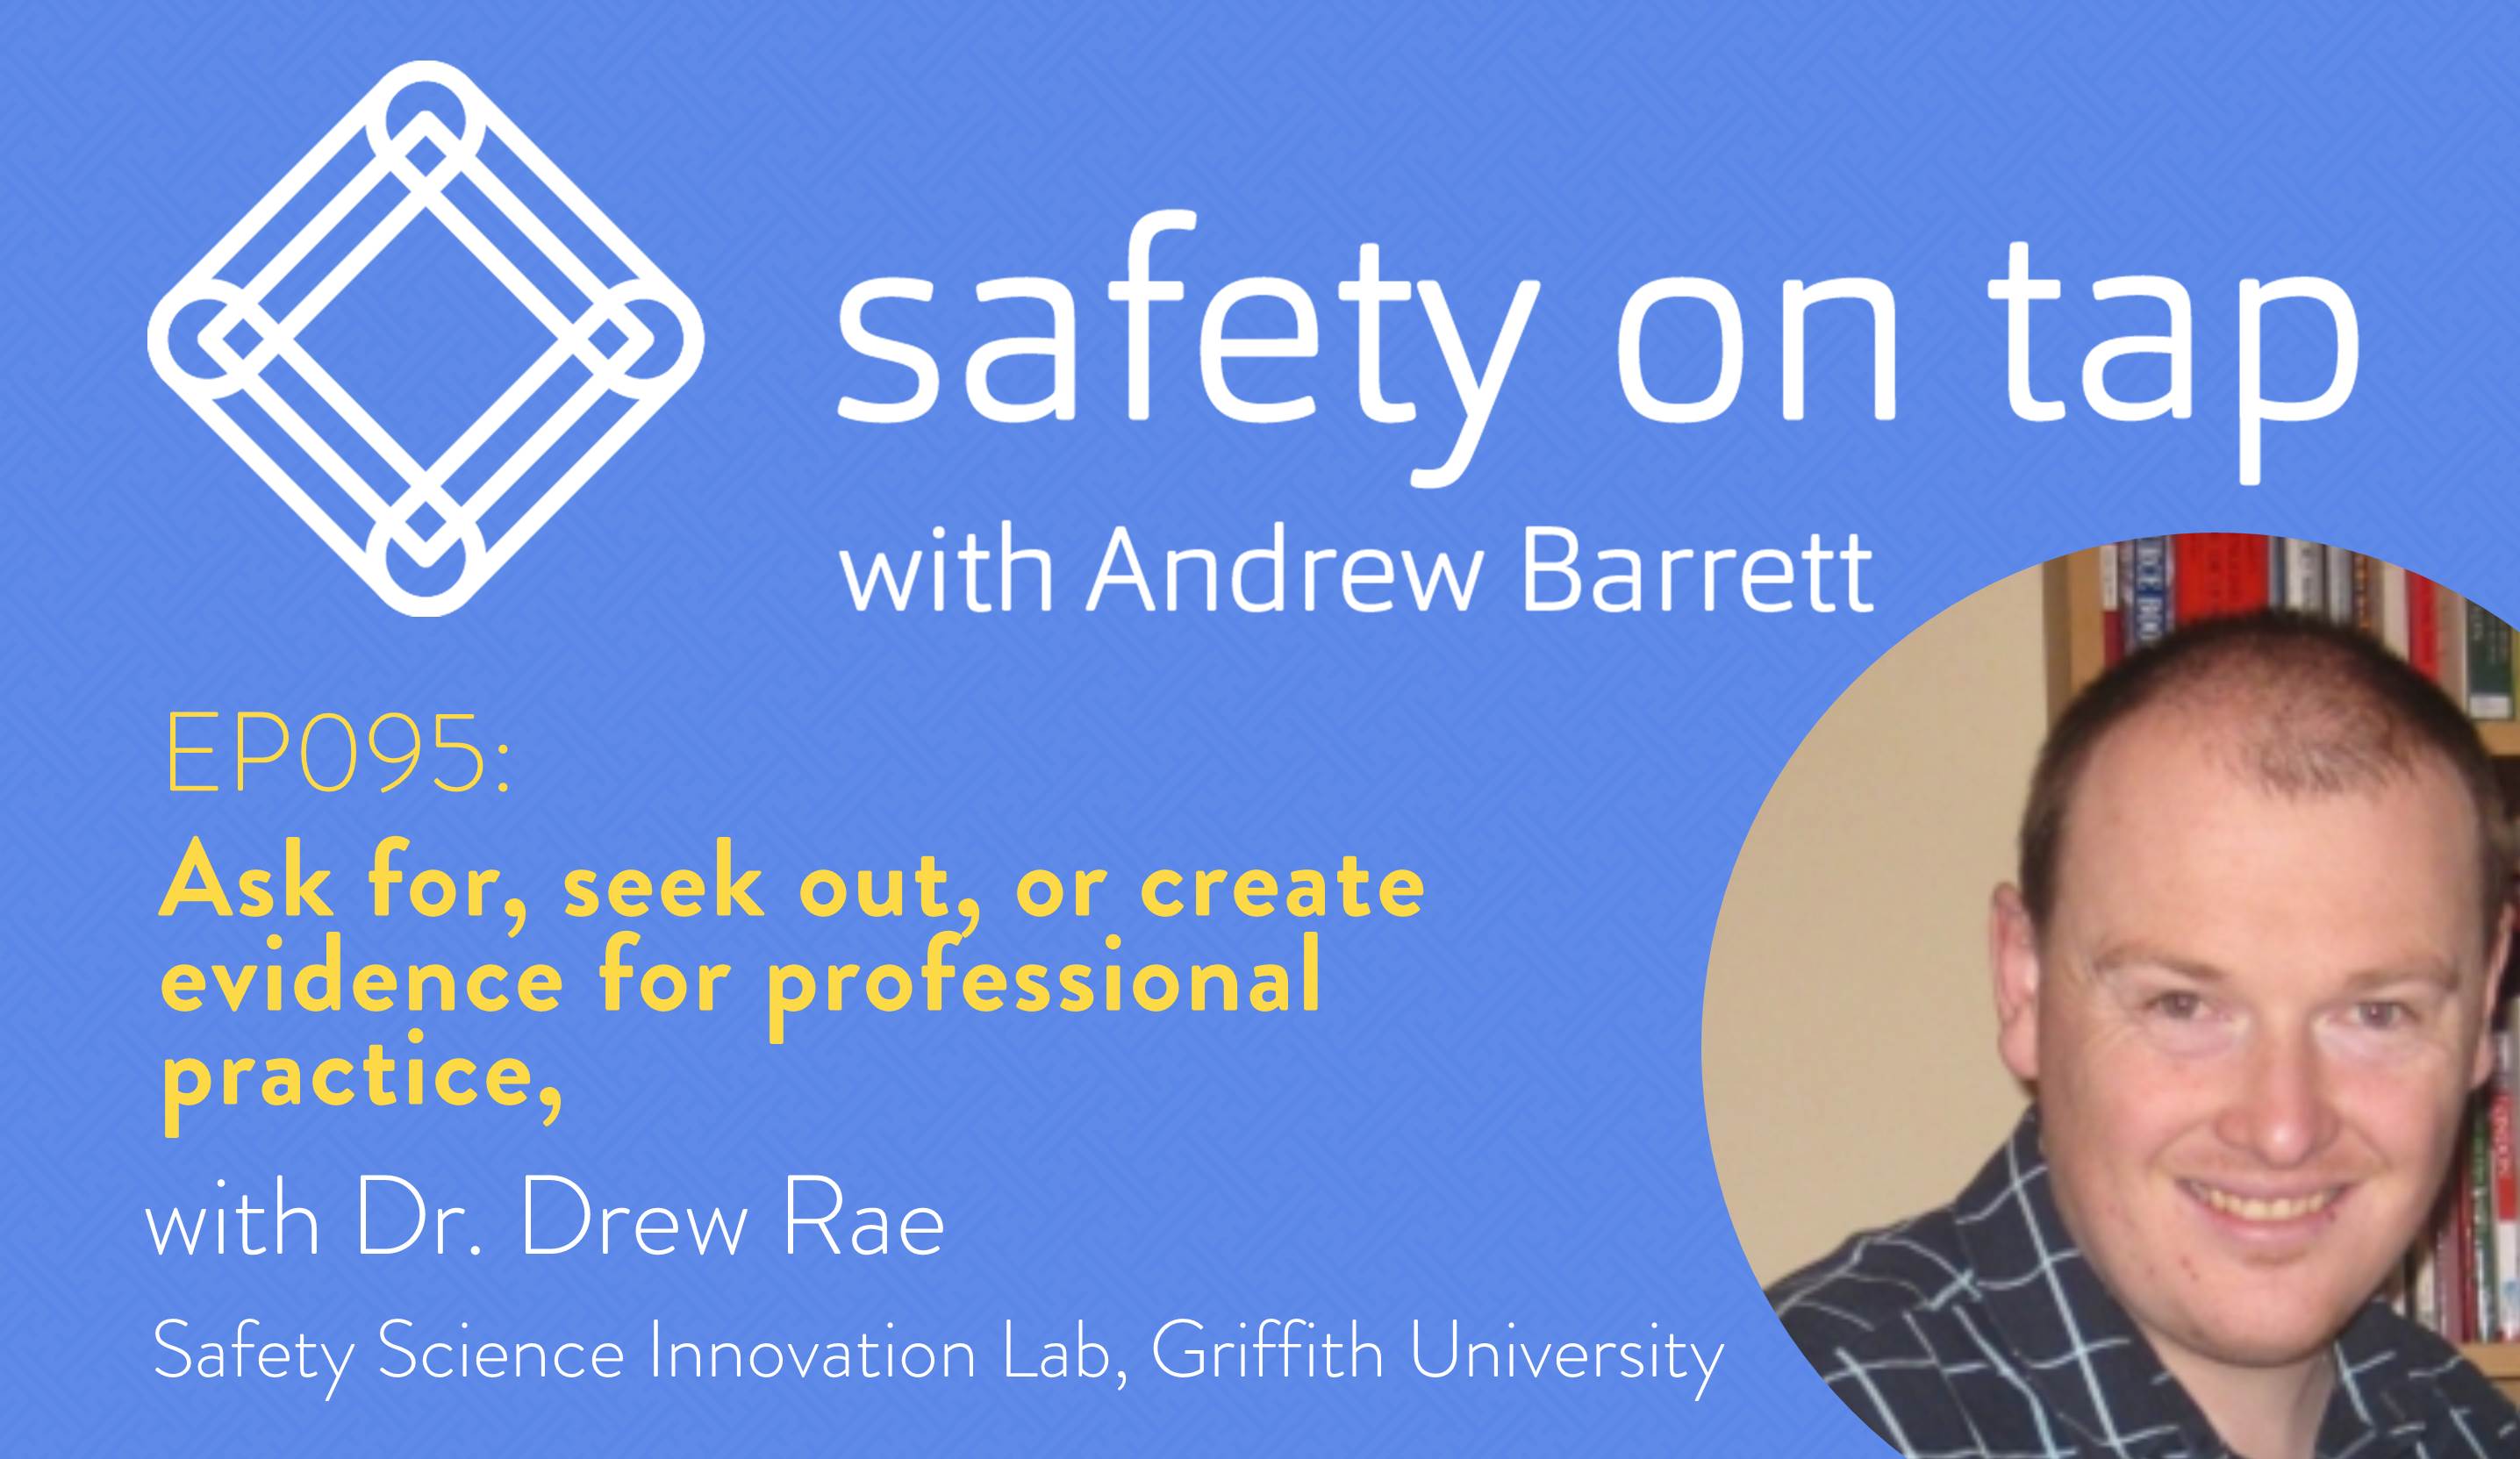 Ep095: Ask for, seek out, or create evidence for professional practice, with Dr Drew Rae